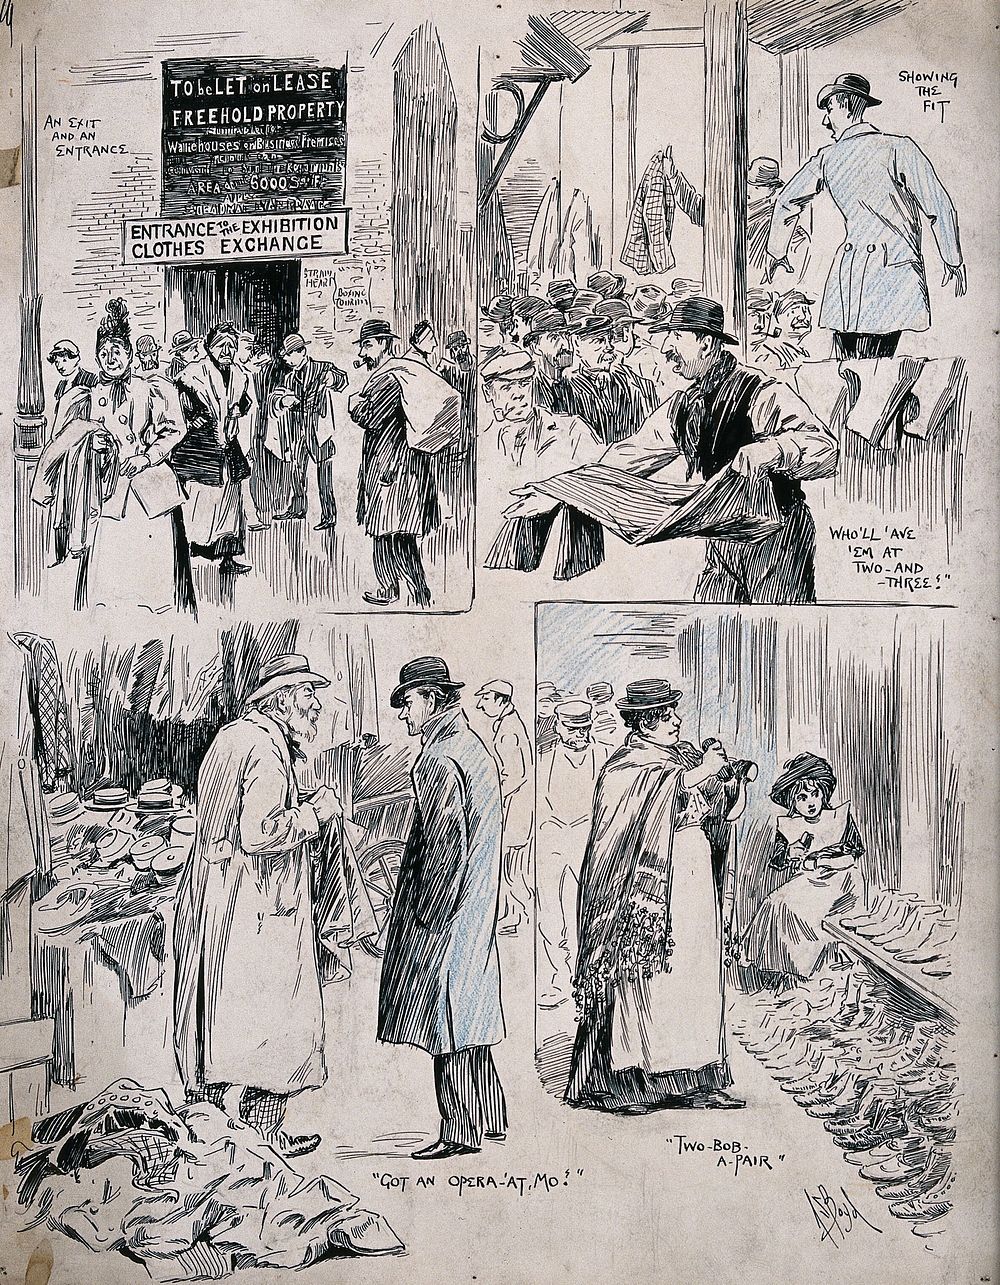 Men and women are buying and selling clothes, hats and shoes at a market. Process print  by A.S. Boyd.